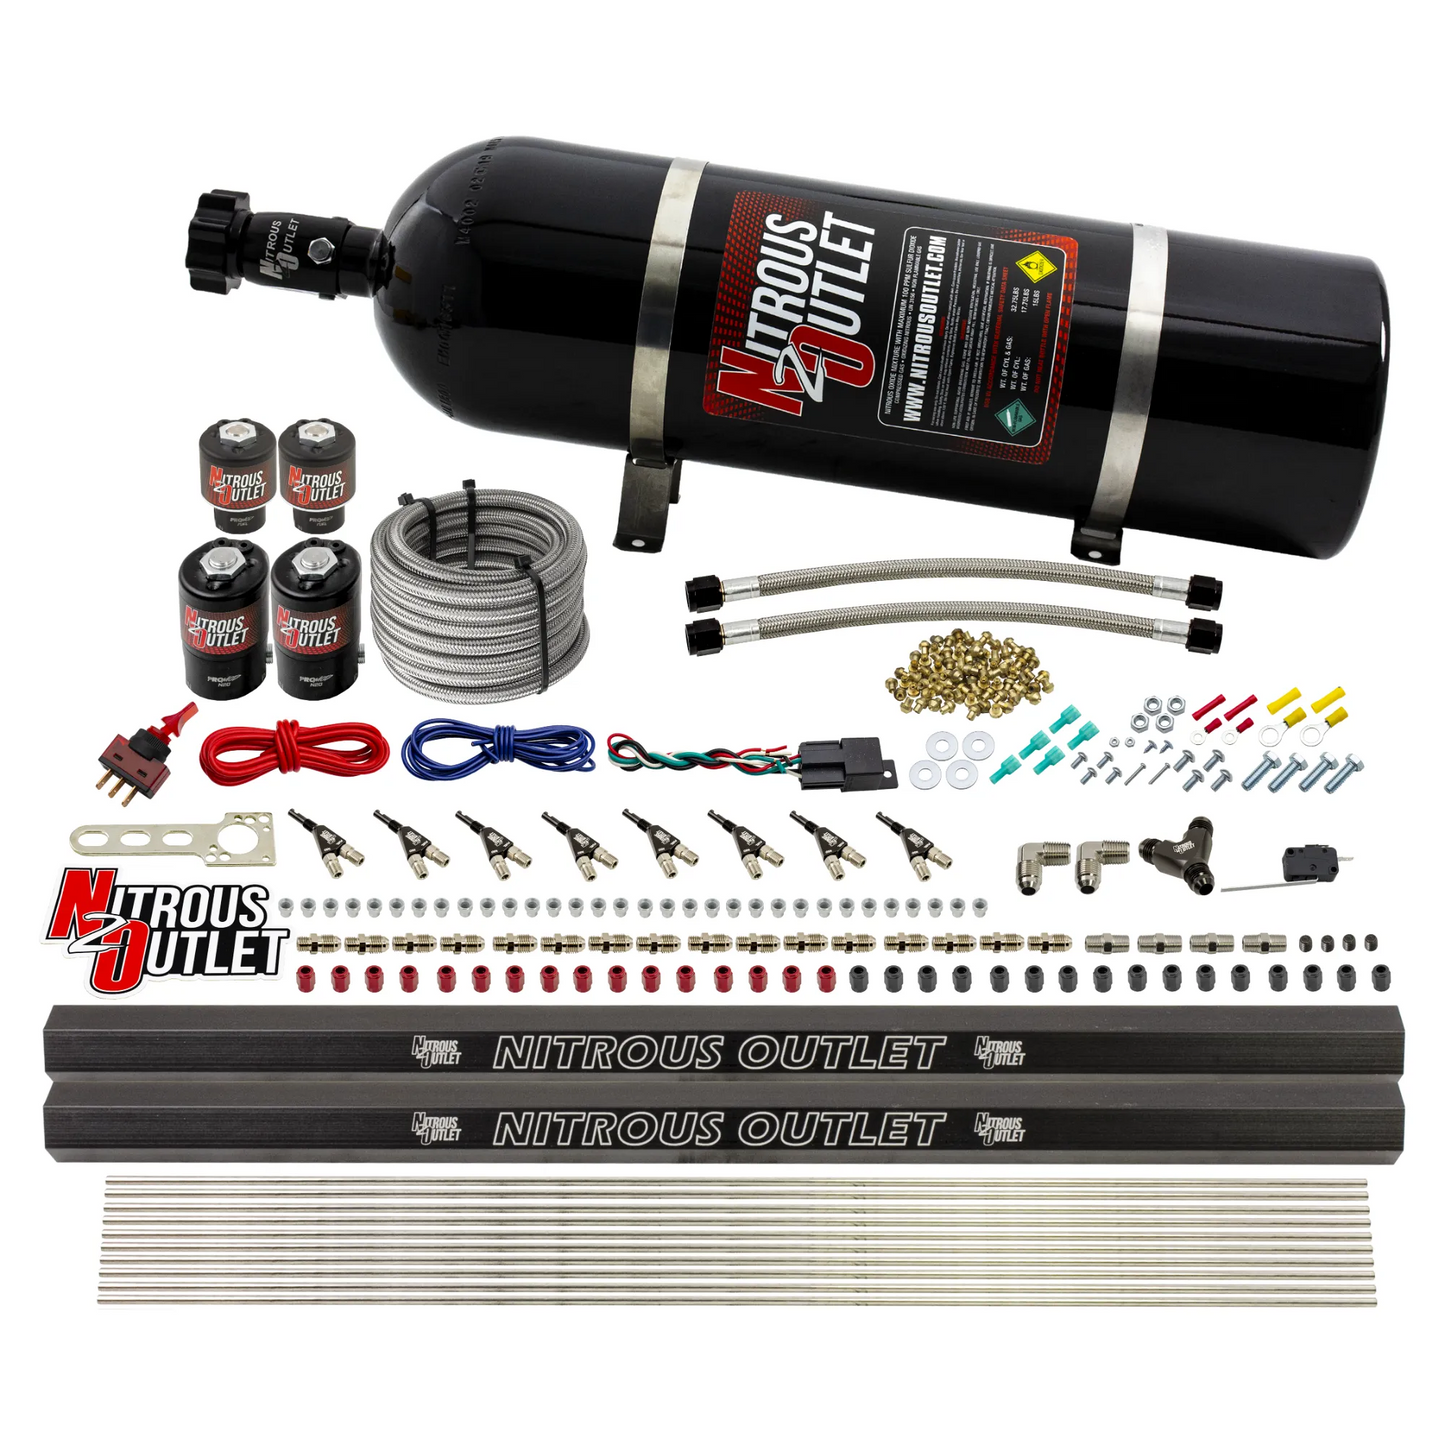 8 Cylinder Single Stage Direct Port Nitrous System with Injection Rails - E85 - .112 Nitrous/.177 Fuel - 45-55 PSI